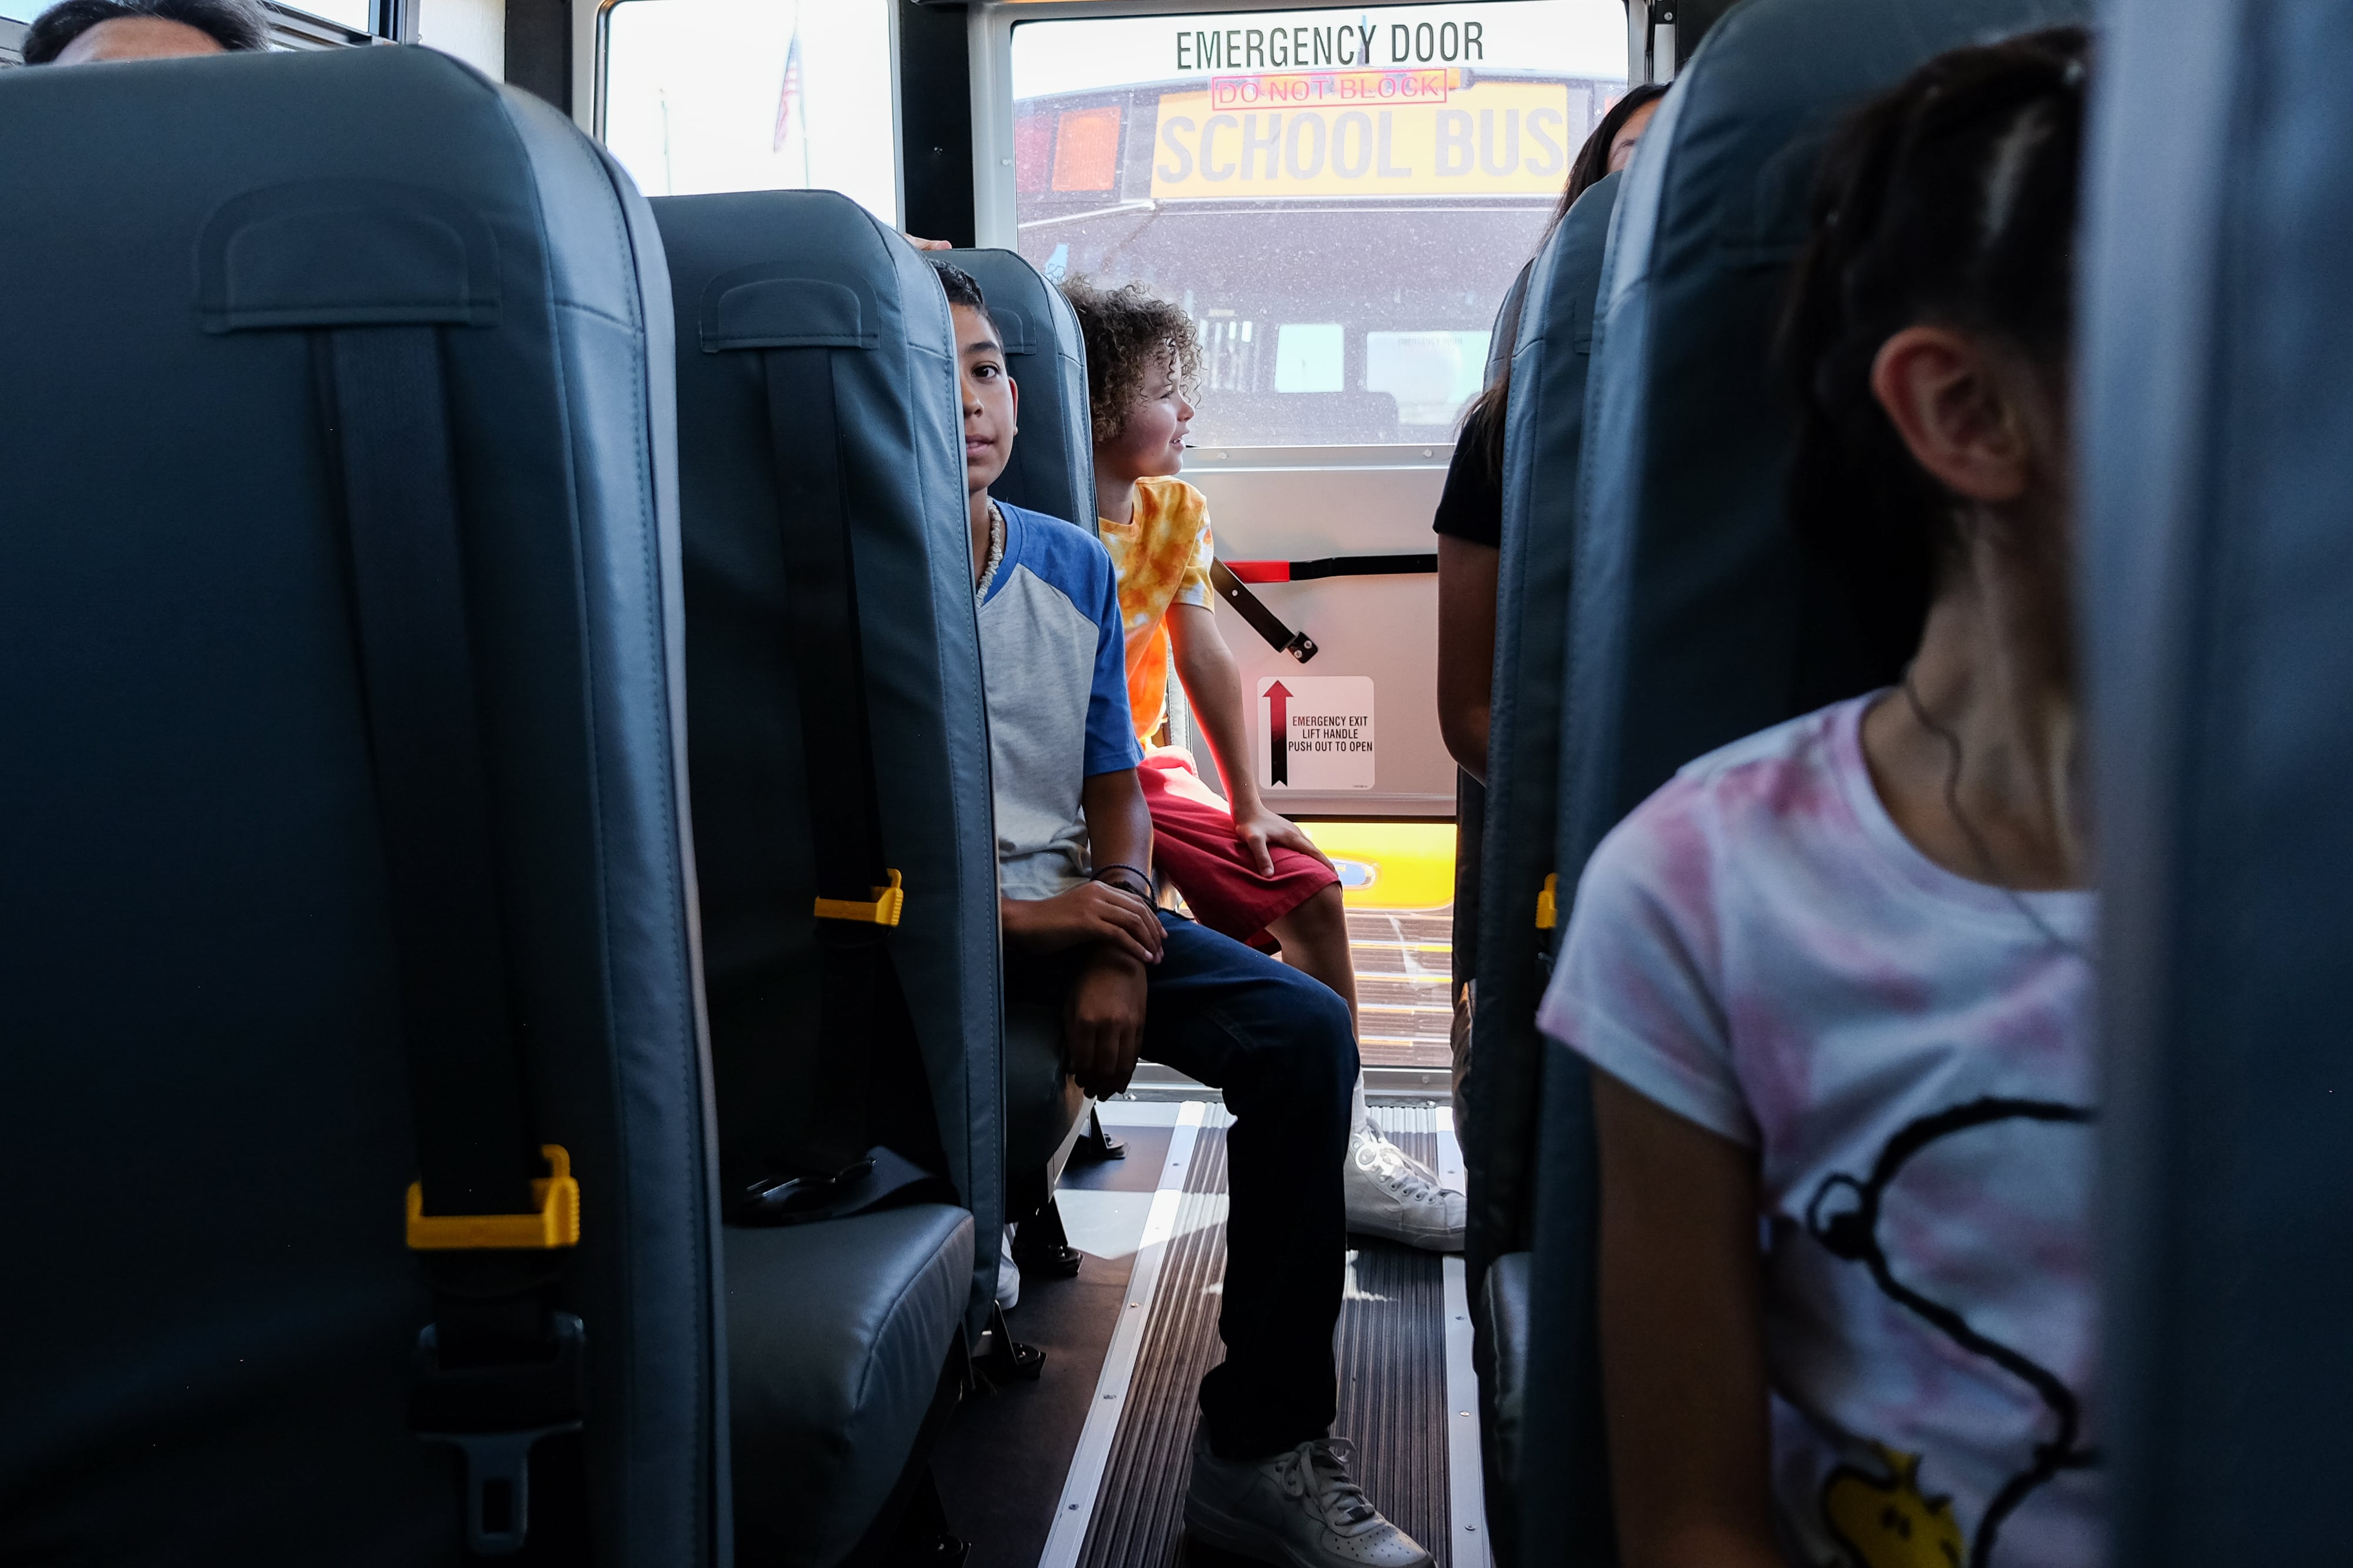 A boy’s face can be seen peering out from a school bus seat. Other children are in the surrounding seats. The view is from inside the bus, looking down the center aisle. Another school bus can be seen out the back window.